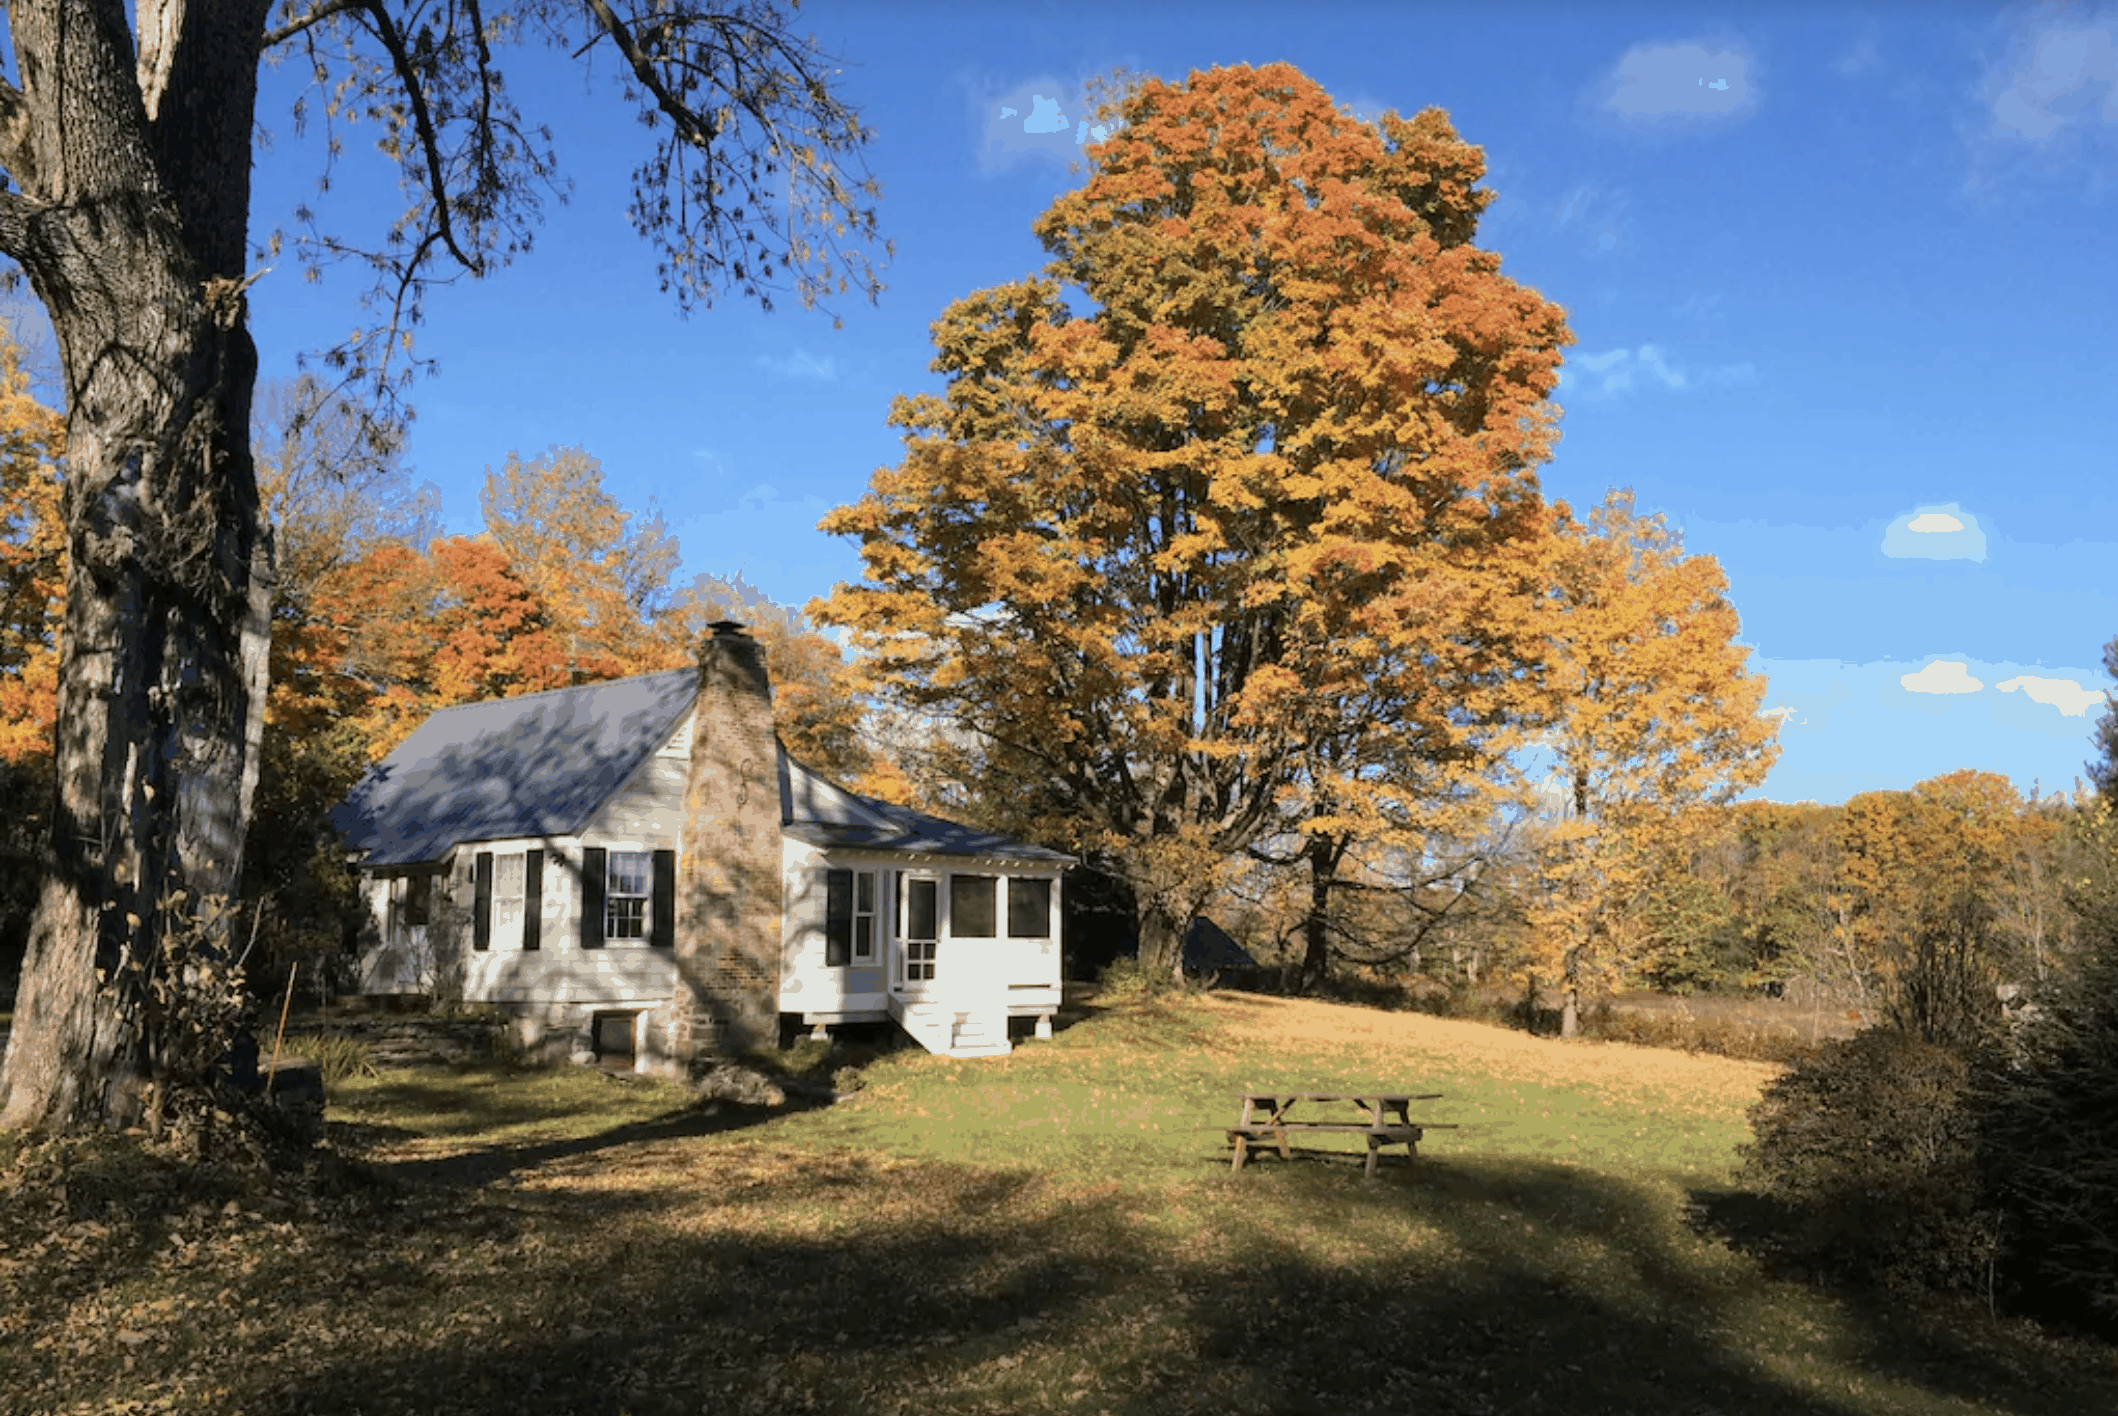 White Massachusetts vacation home with a large lawn and fall leaves on the closest trees.